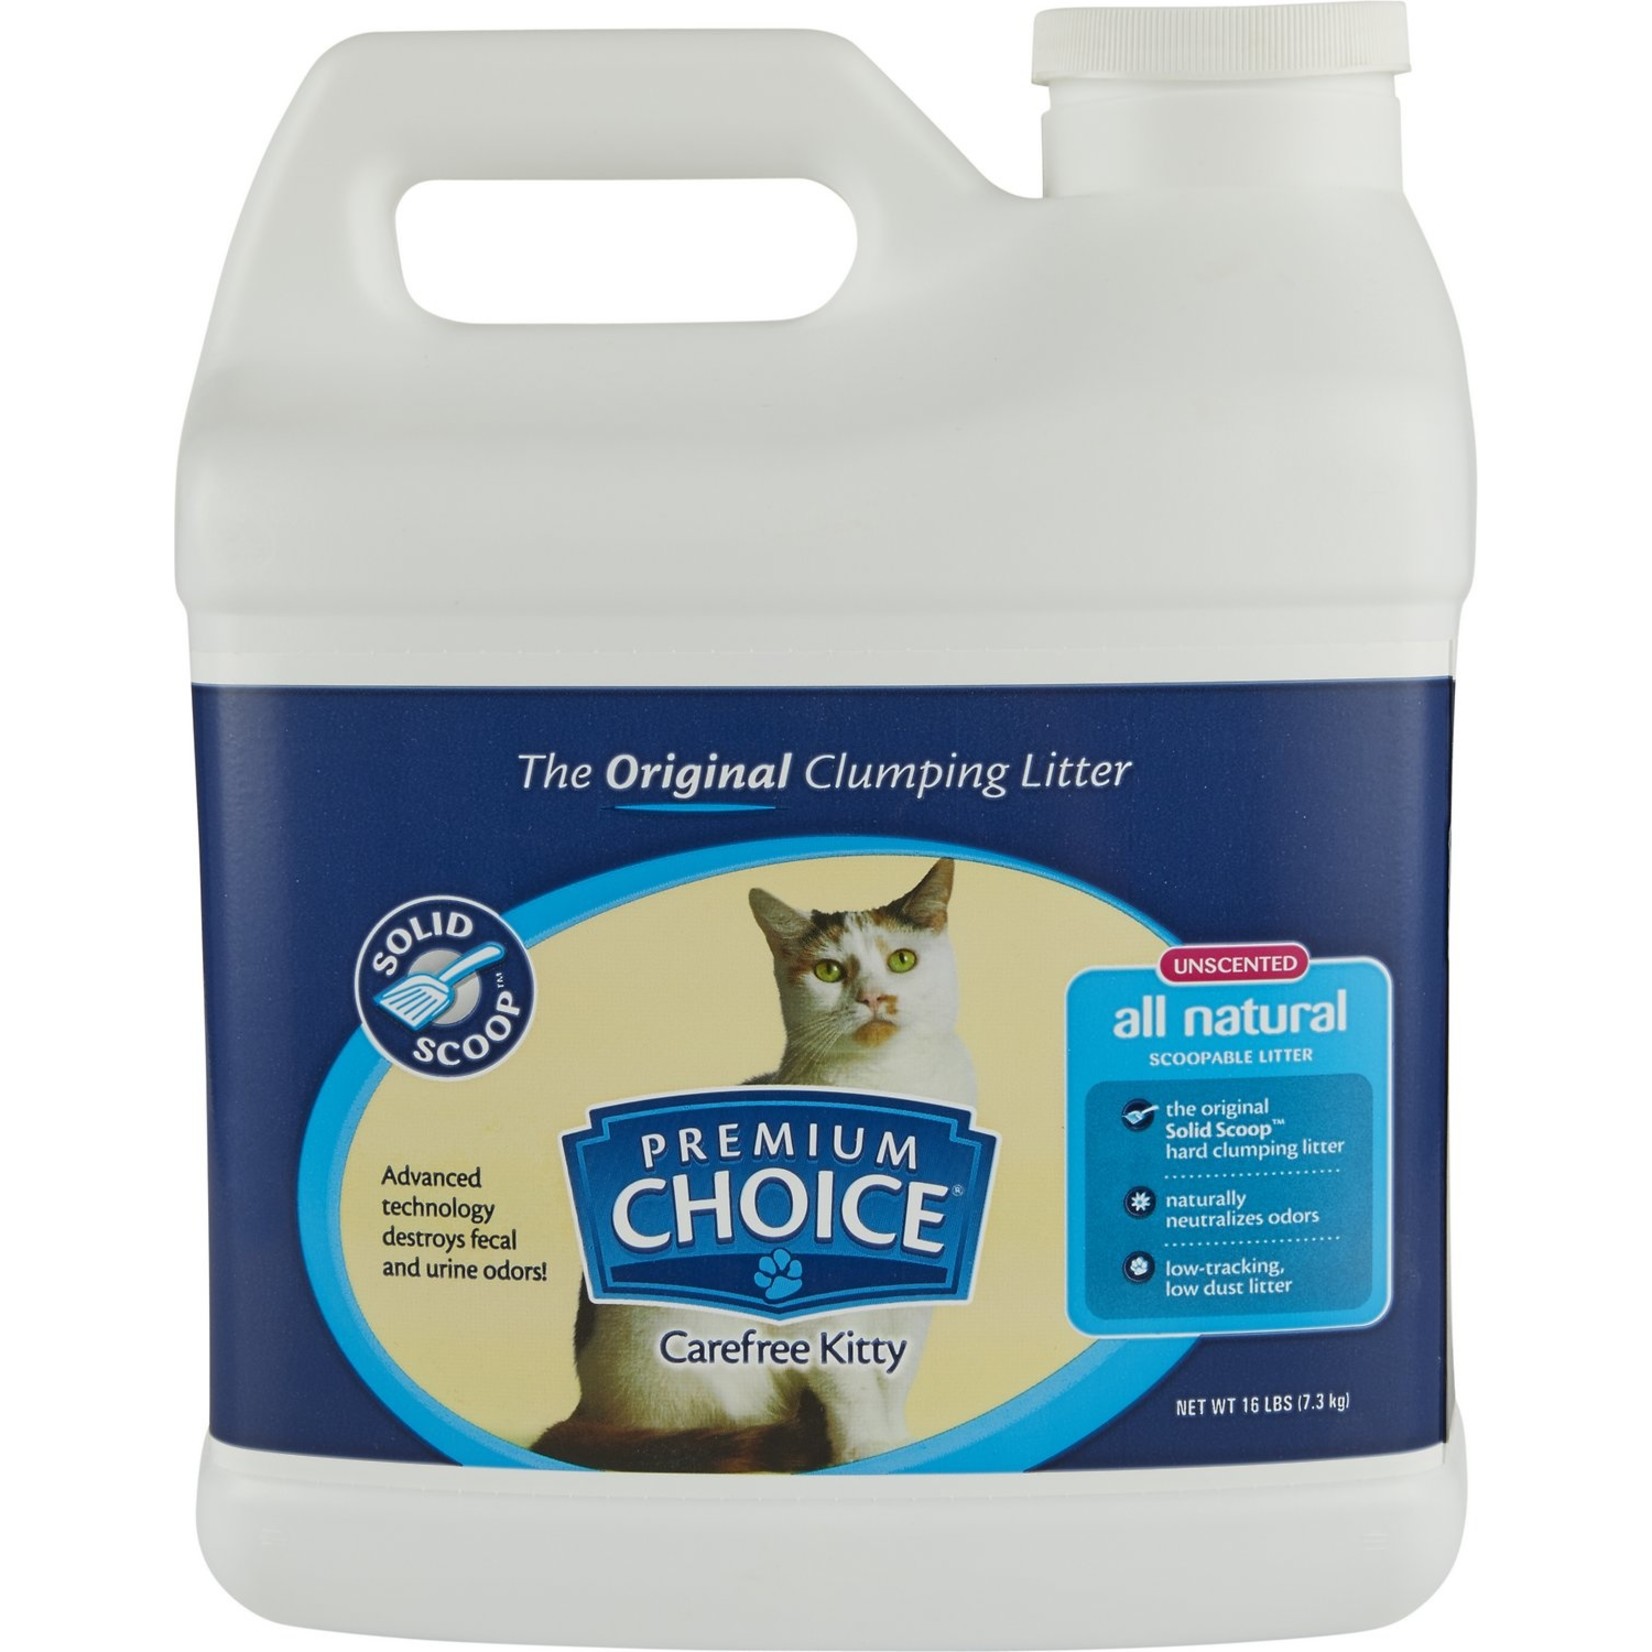 American Colloid Premium Choice Carefree Kitty Unscented All Natural Cat Litter